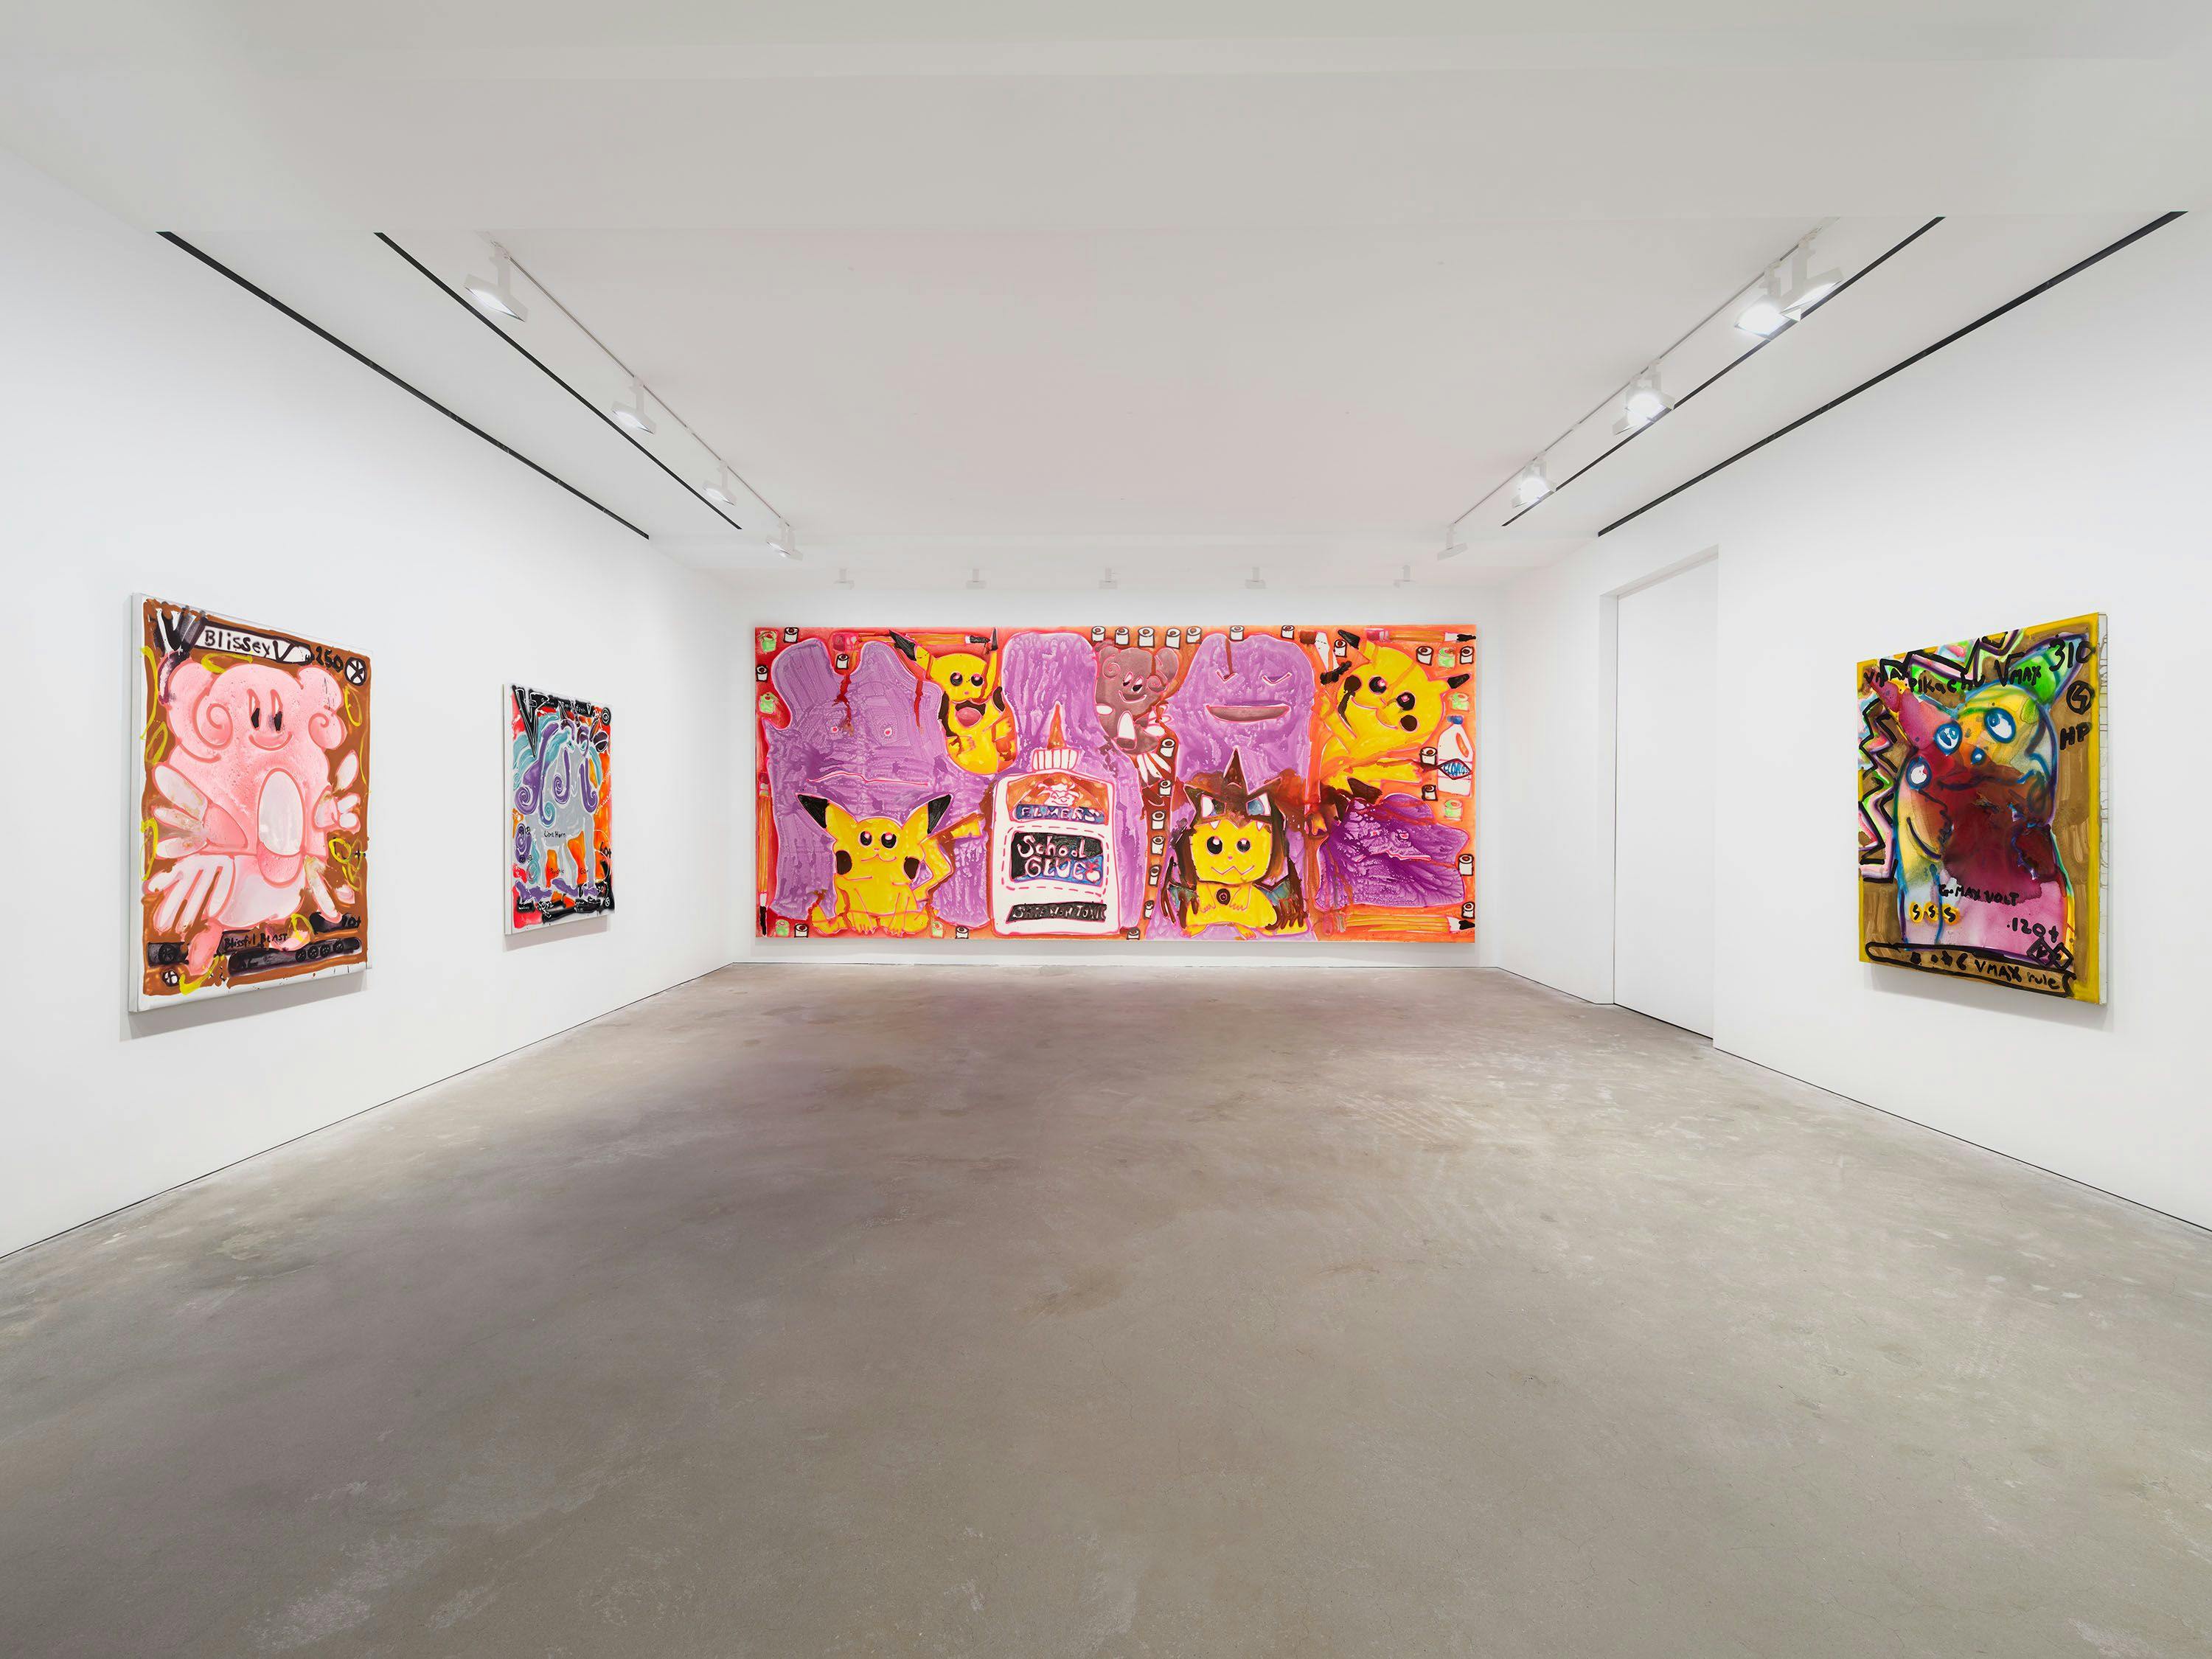 An installation view of the exhibition, Katherine Bernhardt: Dummy doll jealous eyes ditto pikachu beefy mimikyu rough play Galarian rapid dash libra horn HP 270 Vmax full art, at David Zwirner in Hong Kong, dated 2023.